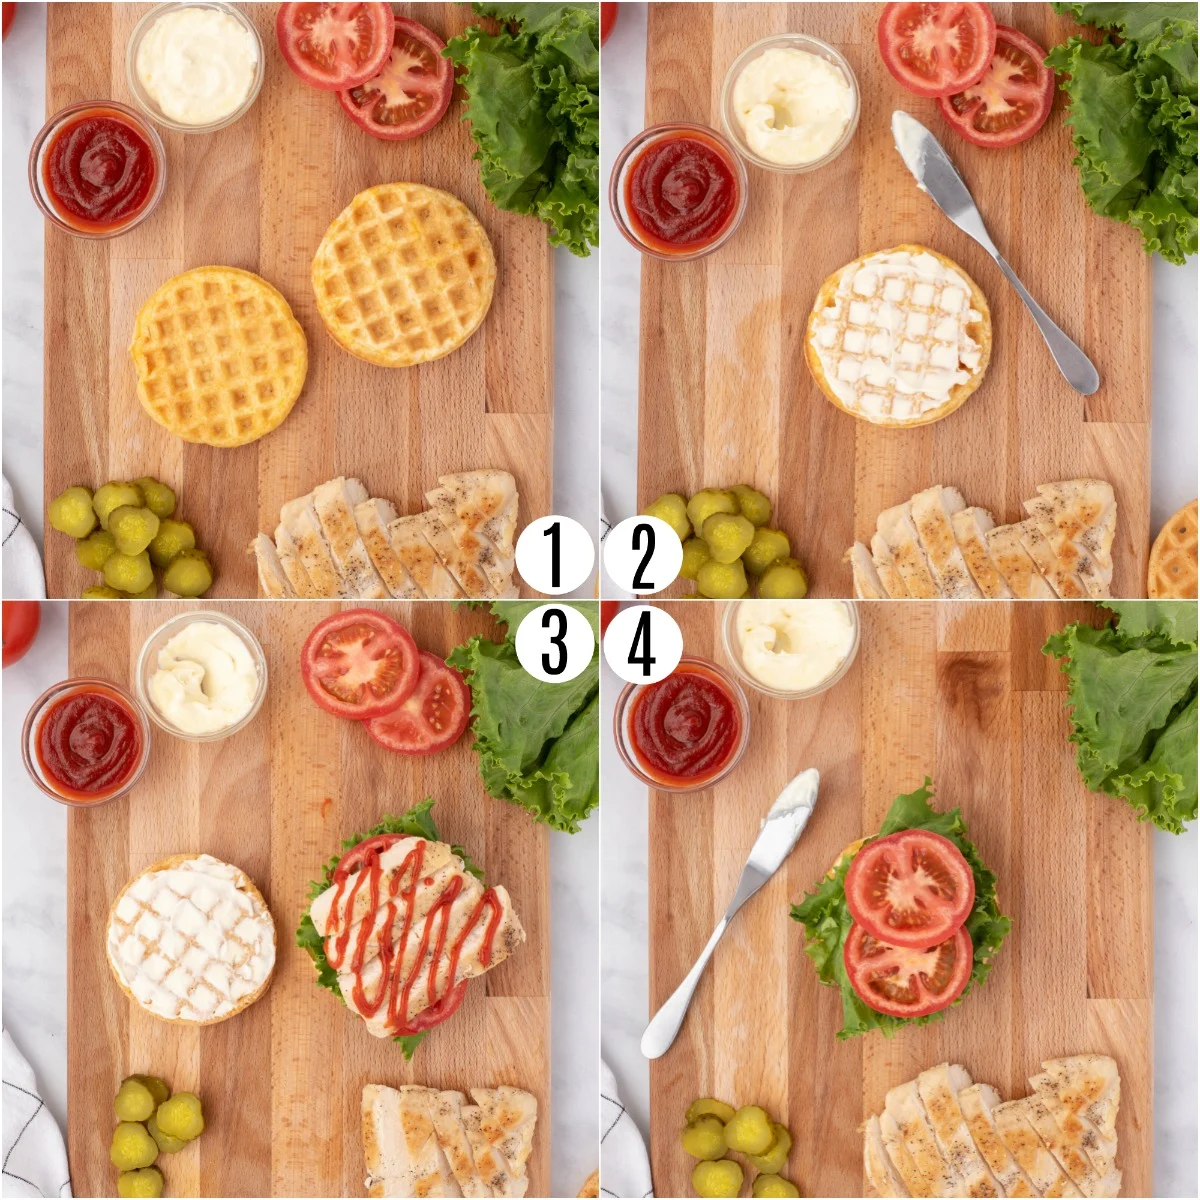 Step by step photos showing how to assemble chicken cheddar chaffle sandwich.